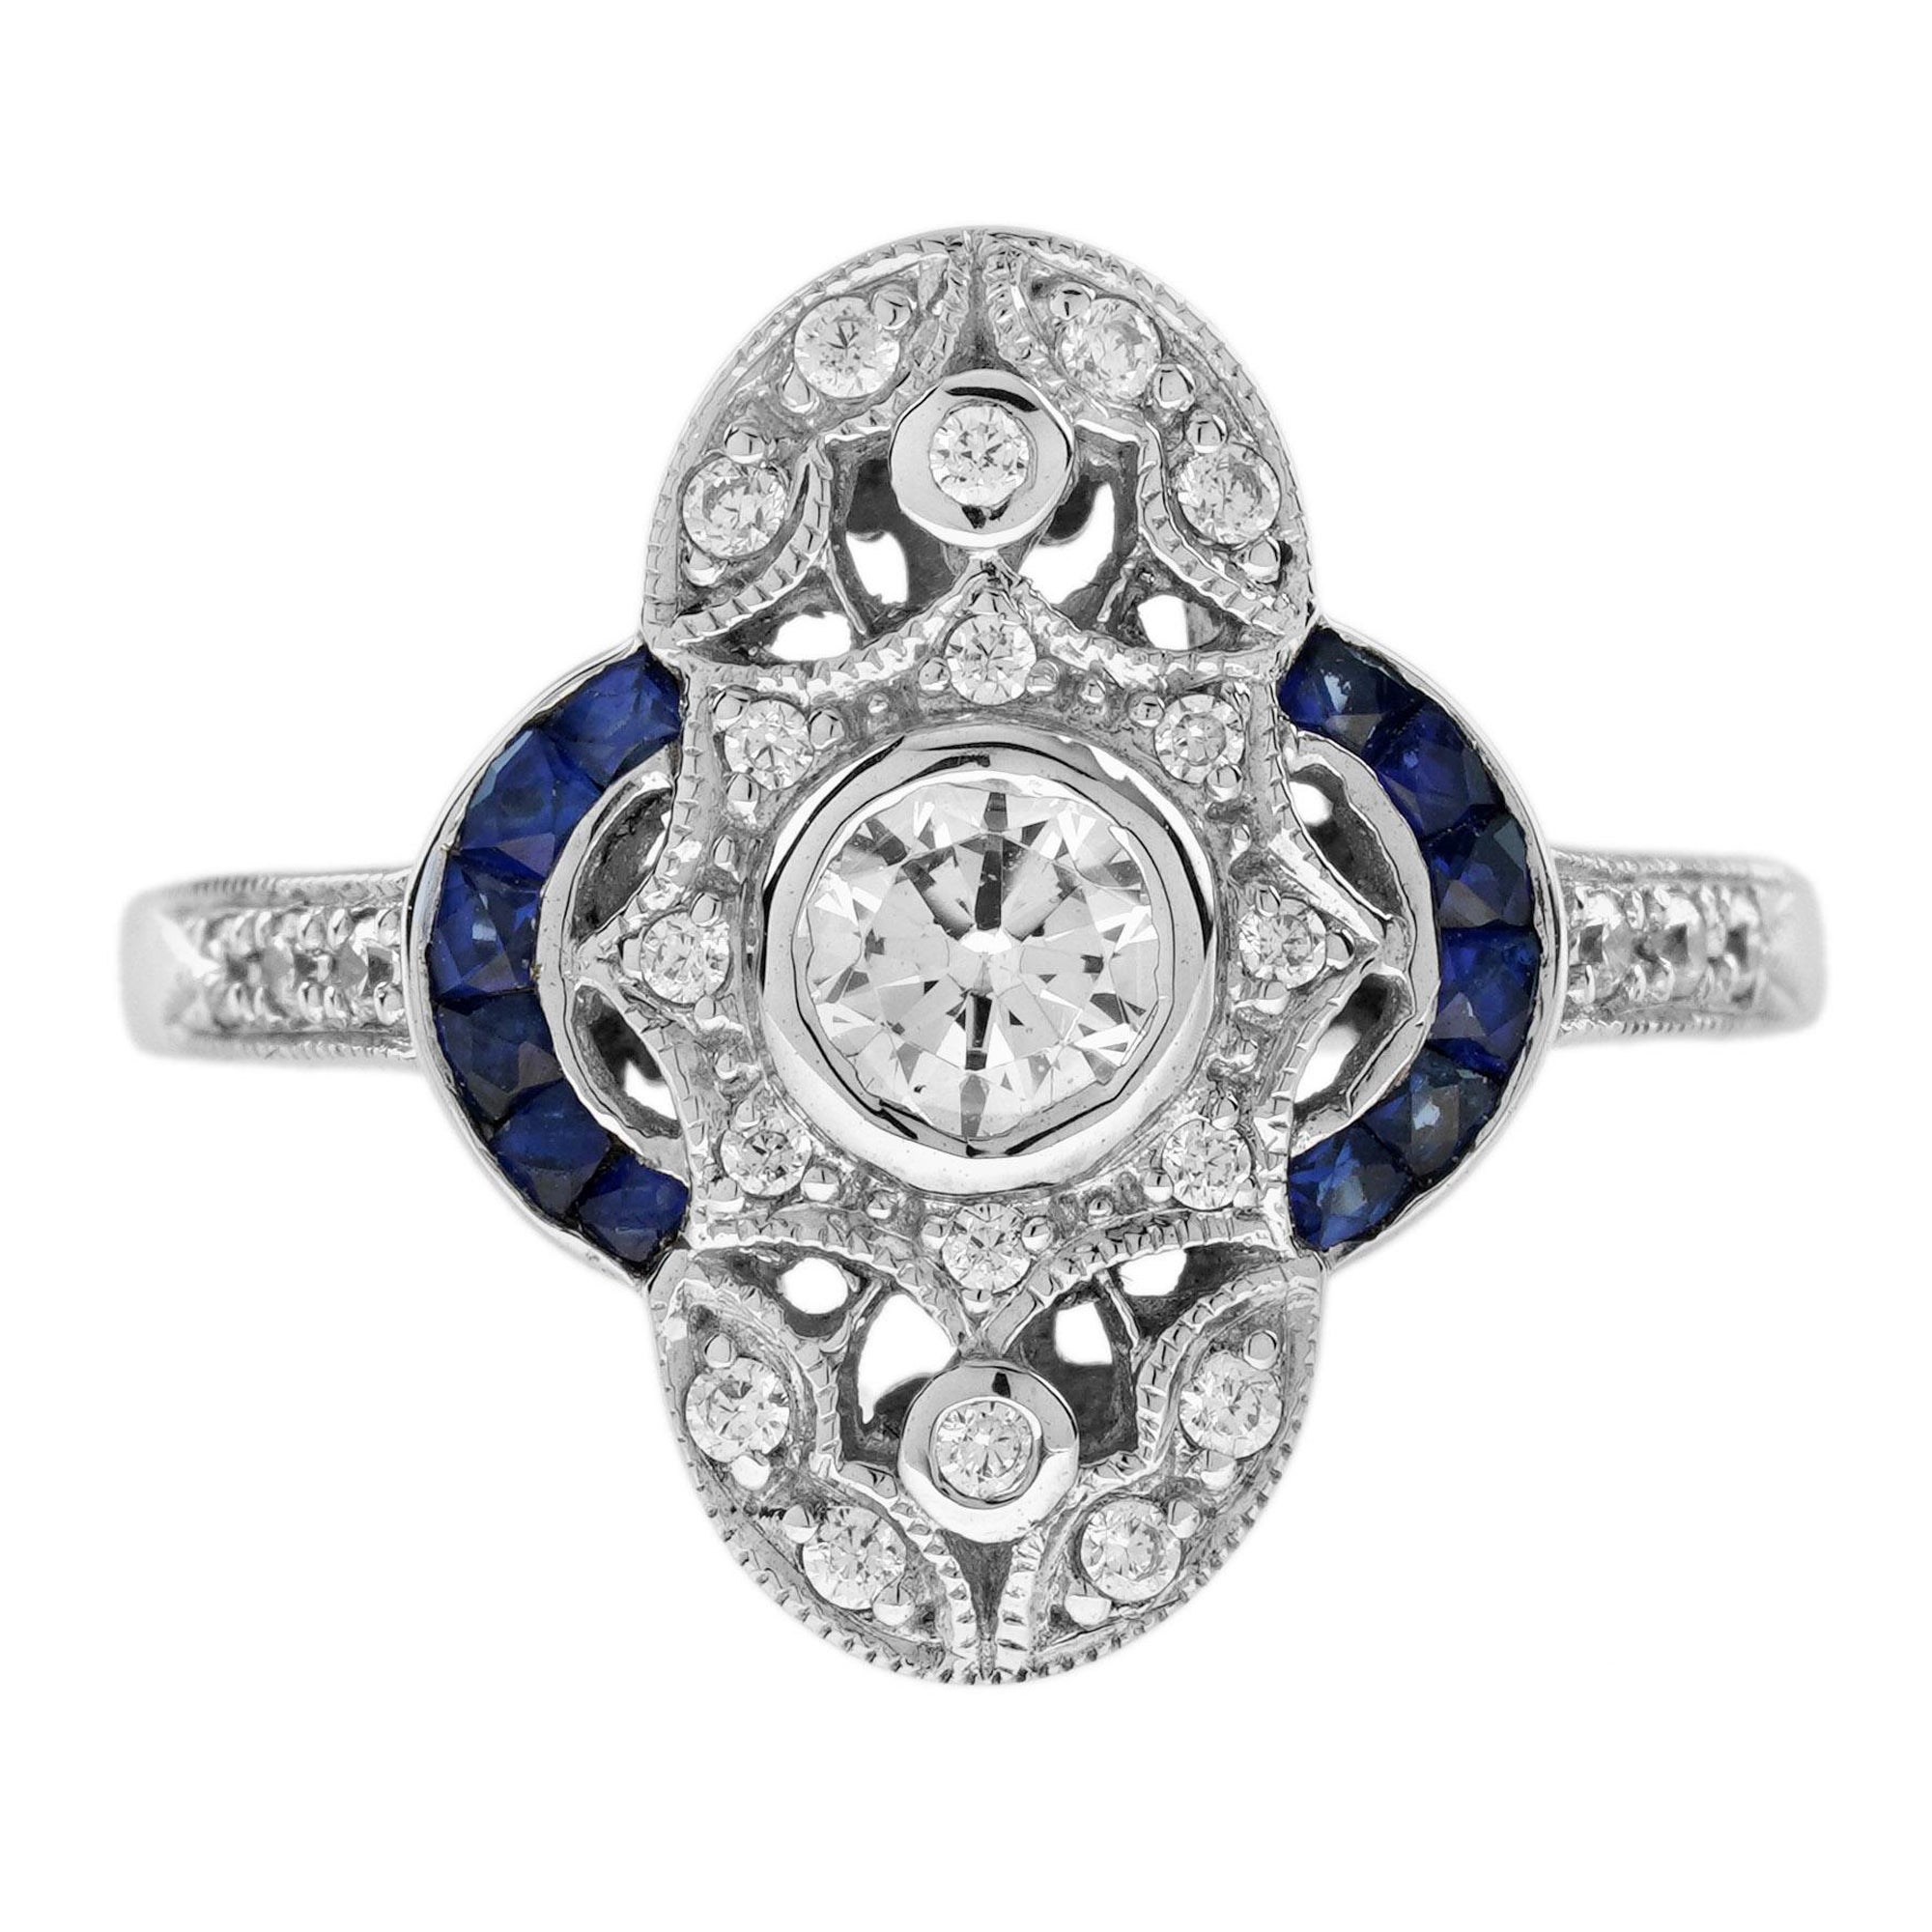 Diamond and Blue Sapphire Art Deco Style Cluster Ring in 18K White Gold